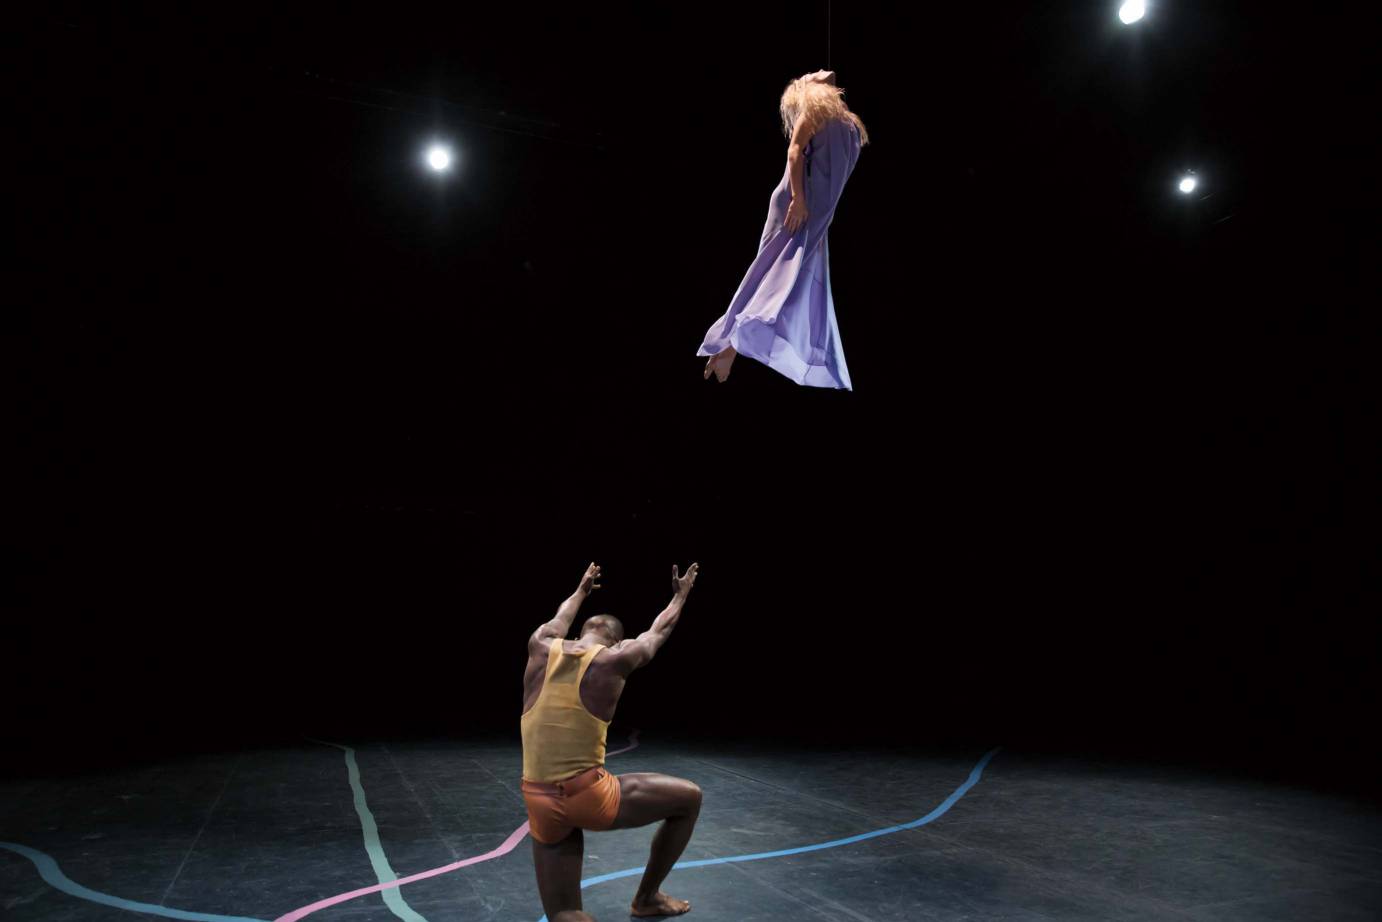 A male dancer propelling a female dancer clad in a purple dress into the air.